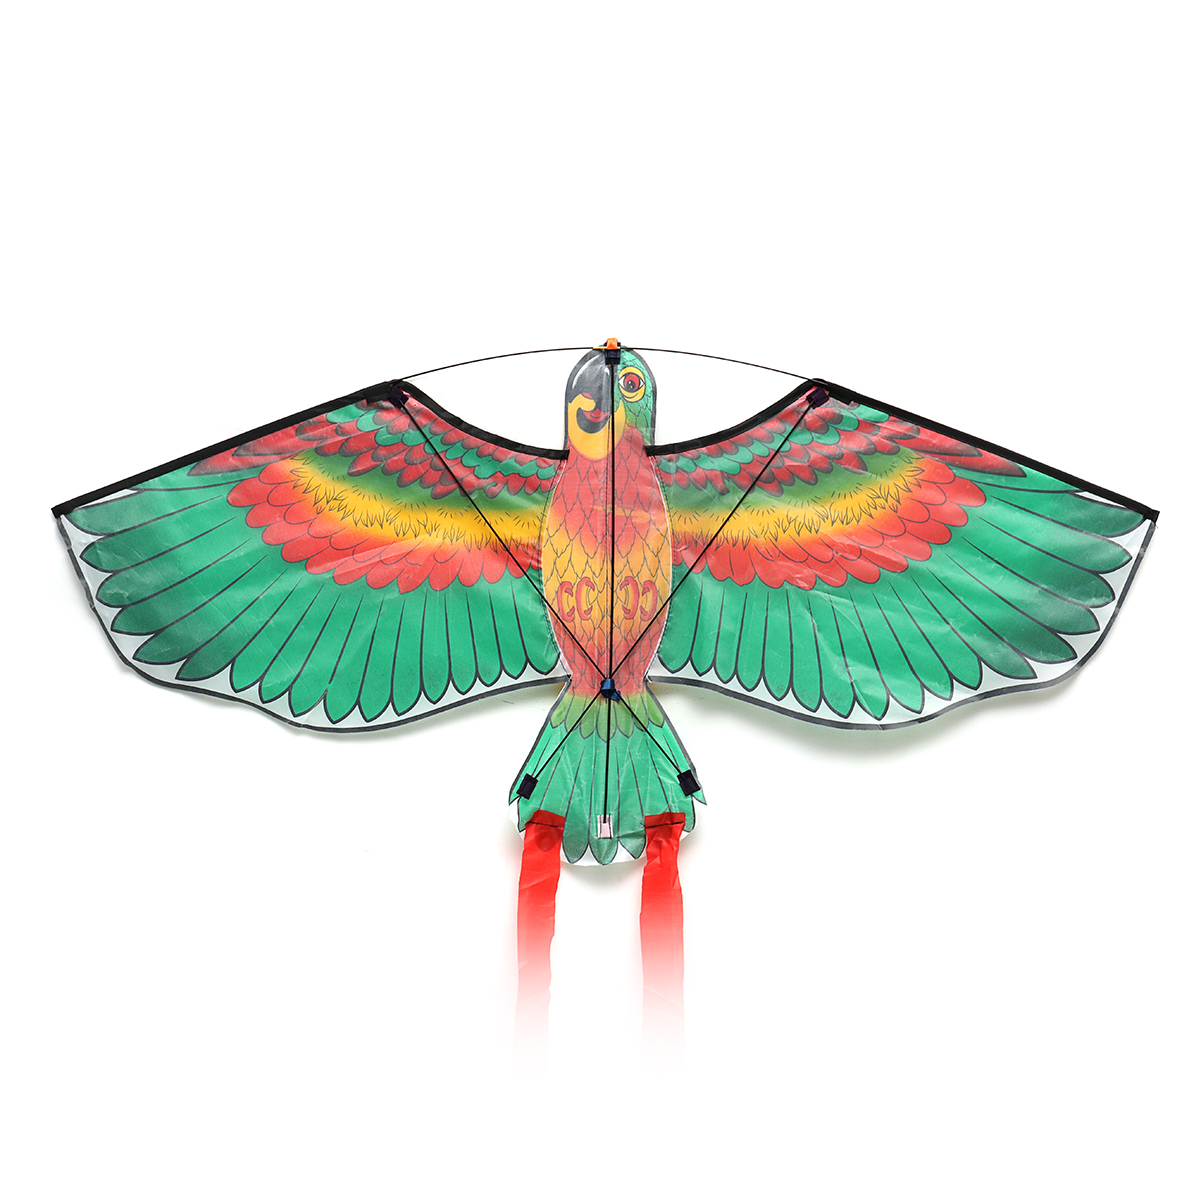 Outdoor-Beach-Park-Polyester-Camping-Flying-Kite-Bird-Parrot-Steady-With-String-Spool-For-Adults-Kid-1347624-2